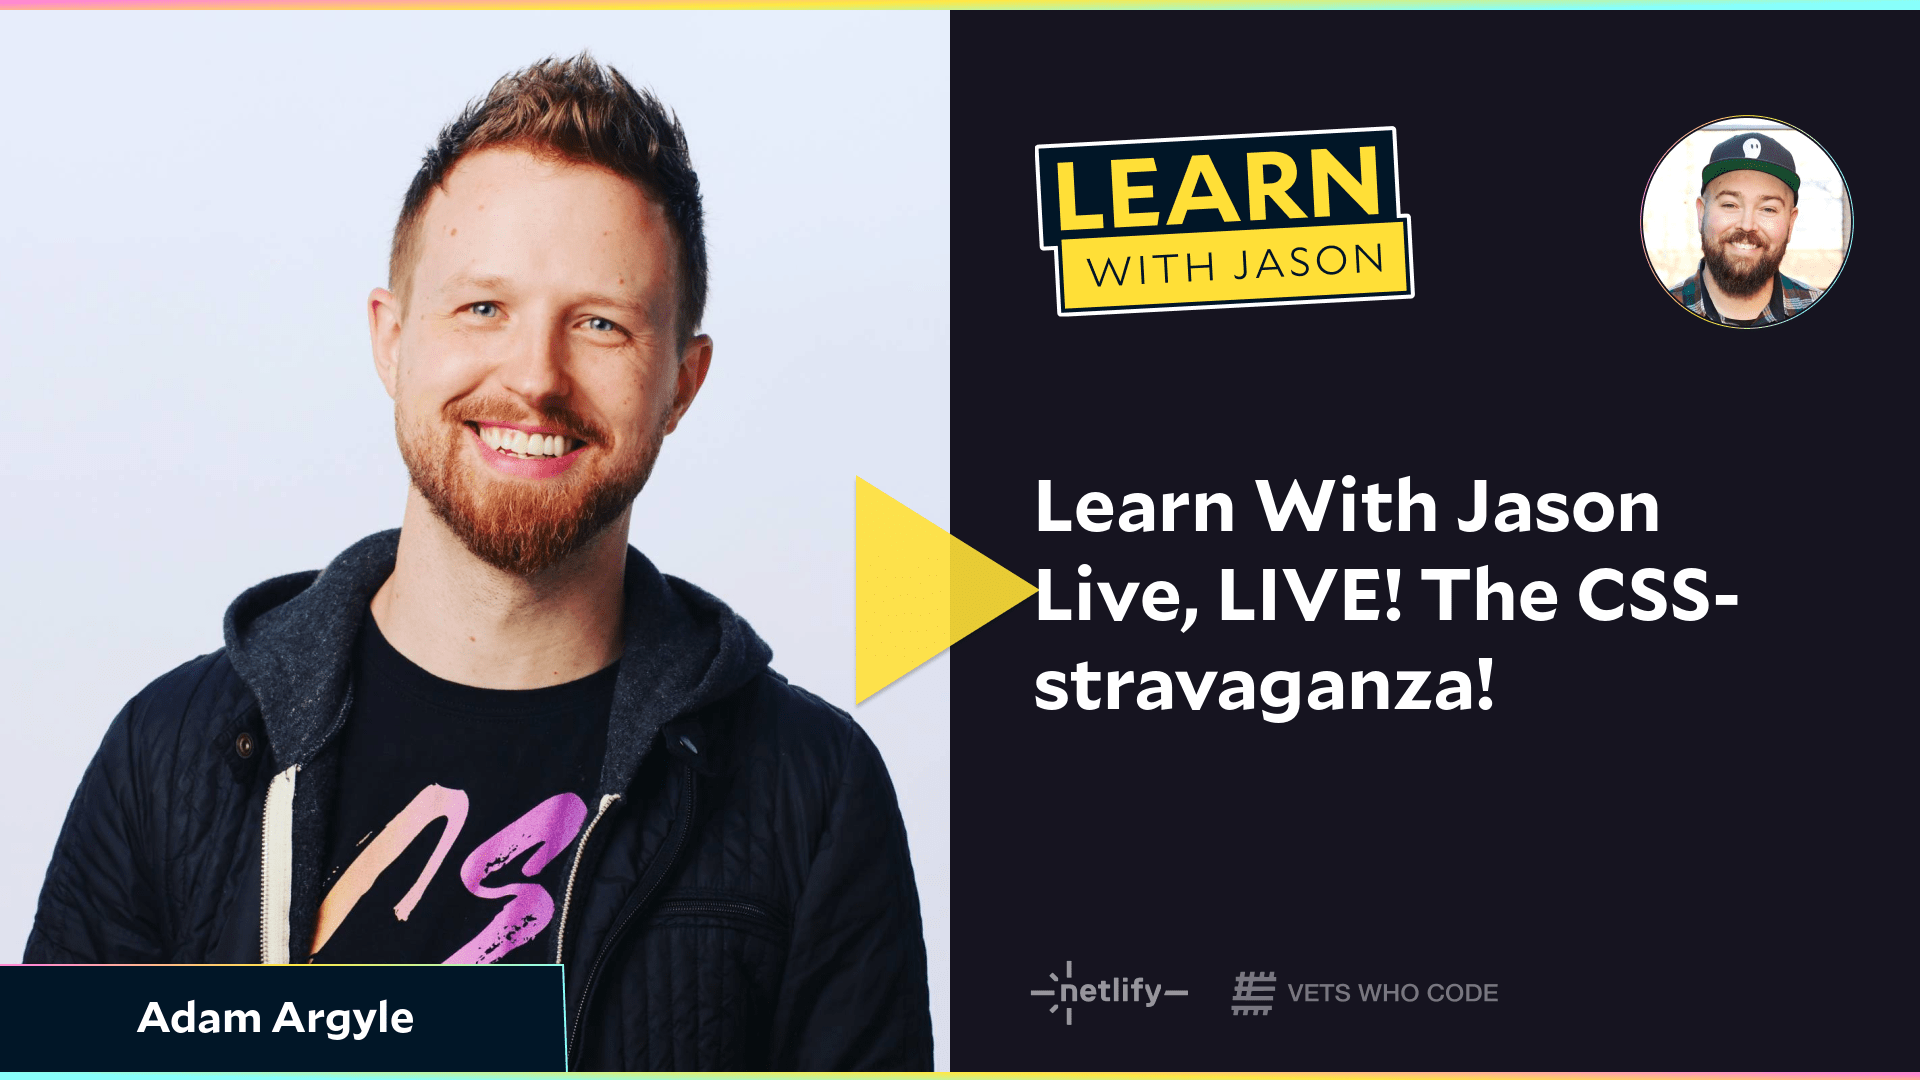 Learn With Jason Live, LIVE! The CSS-stravaganza! (with Adam Argyle)